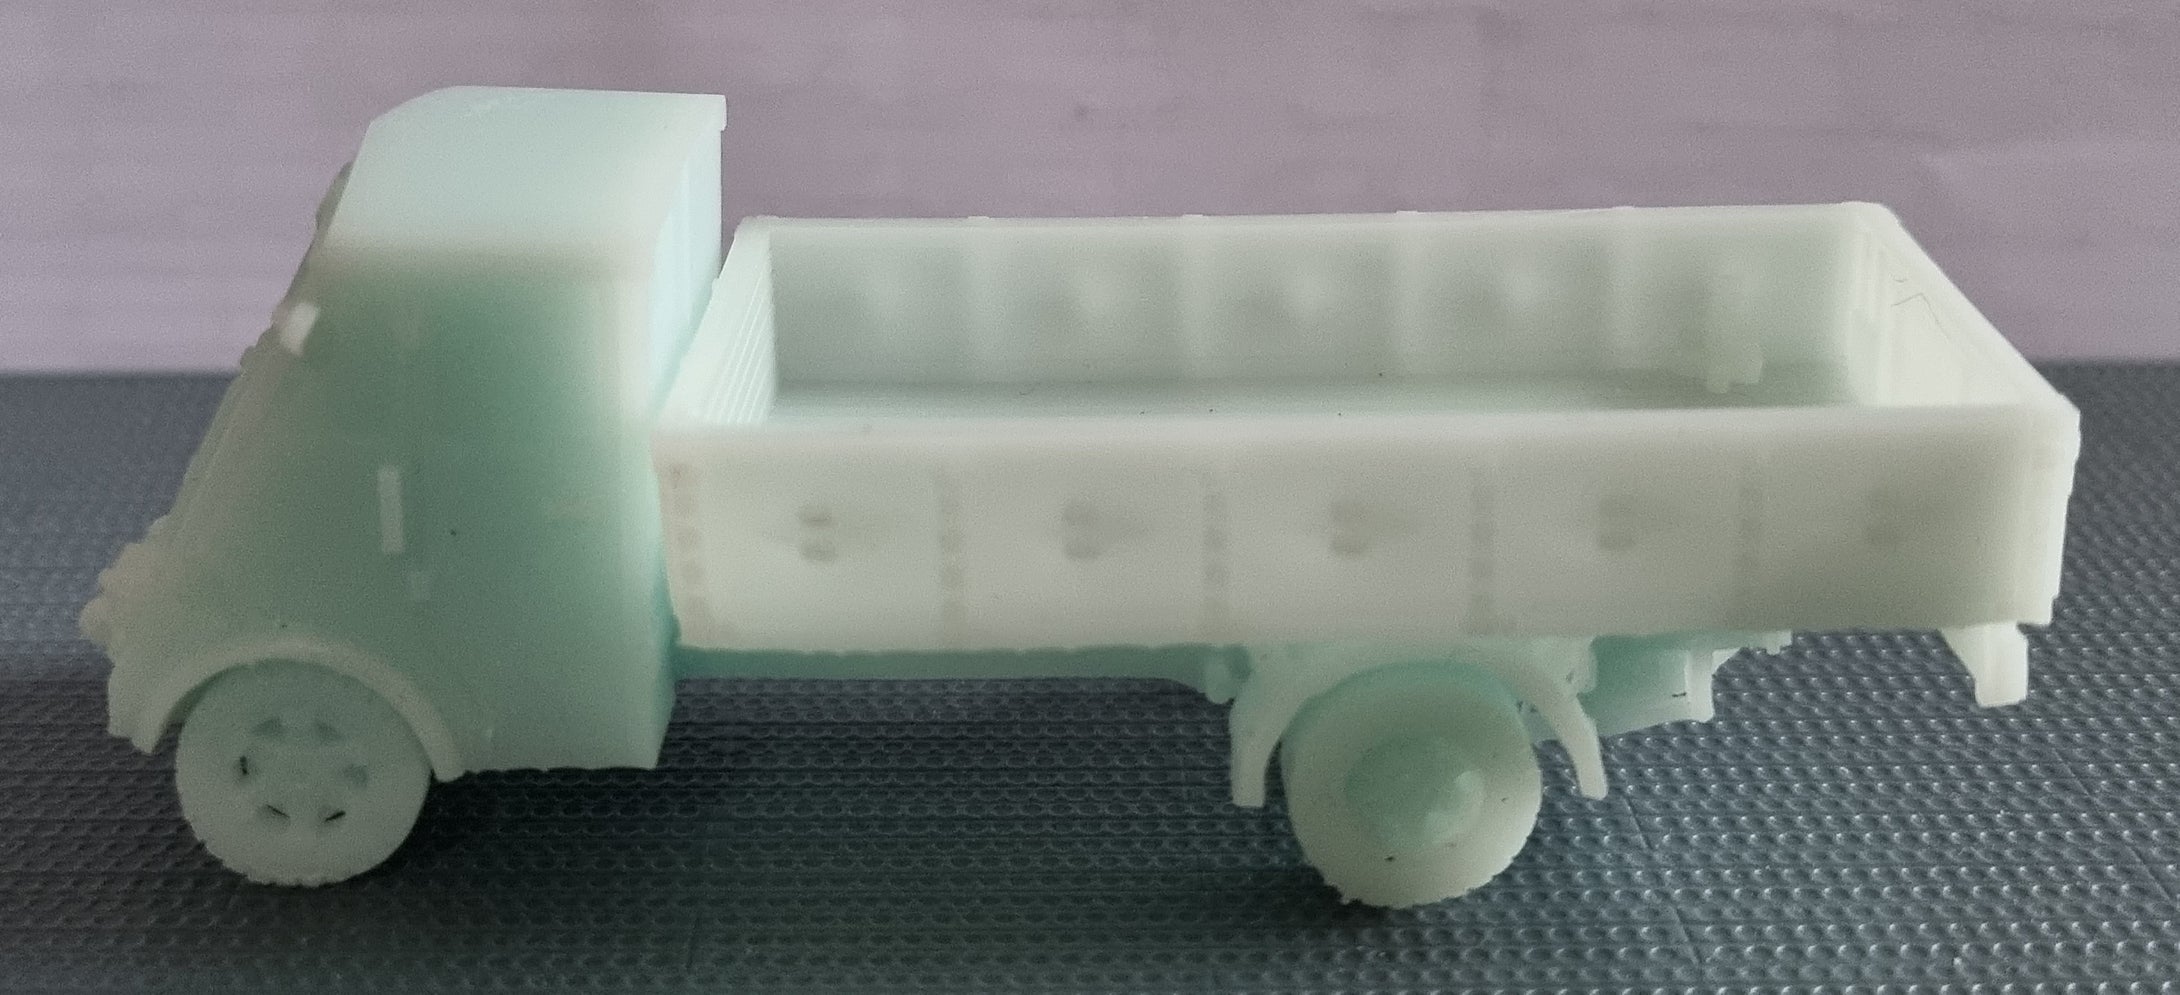 3D Printed vehicle French truck